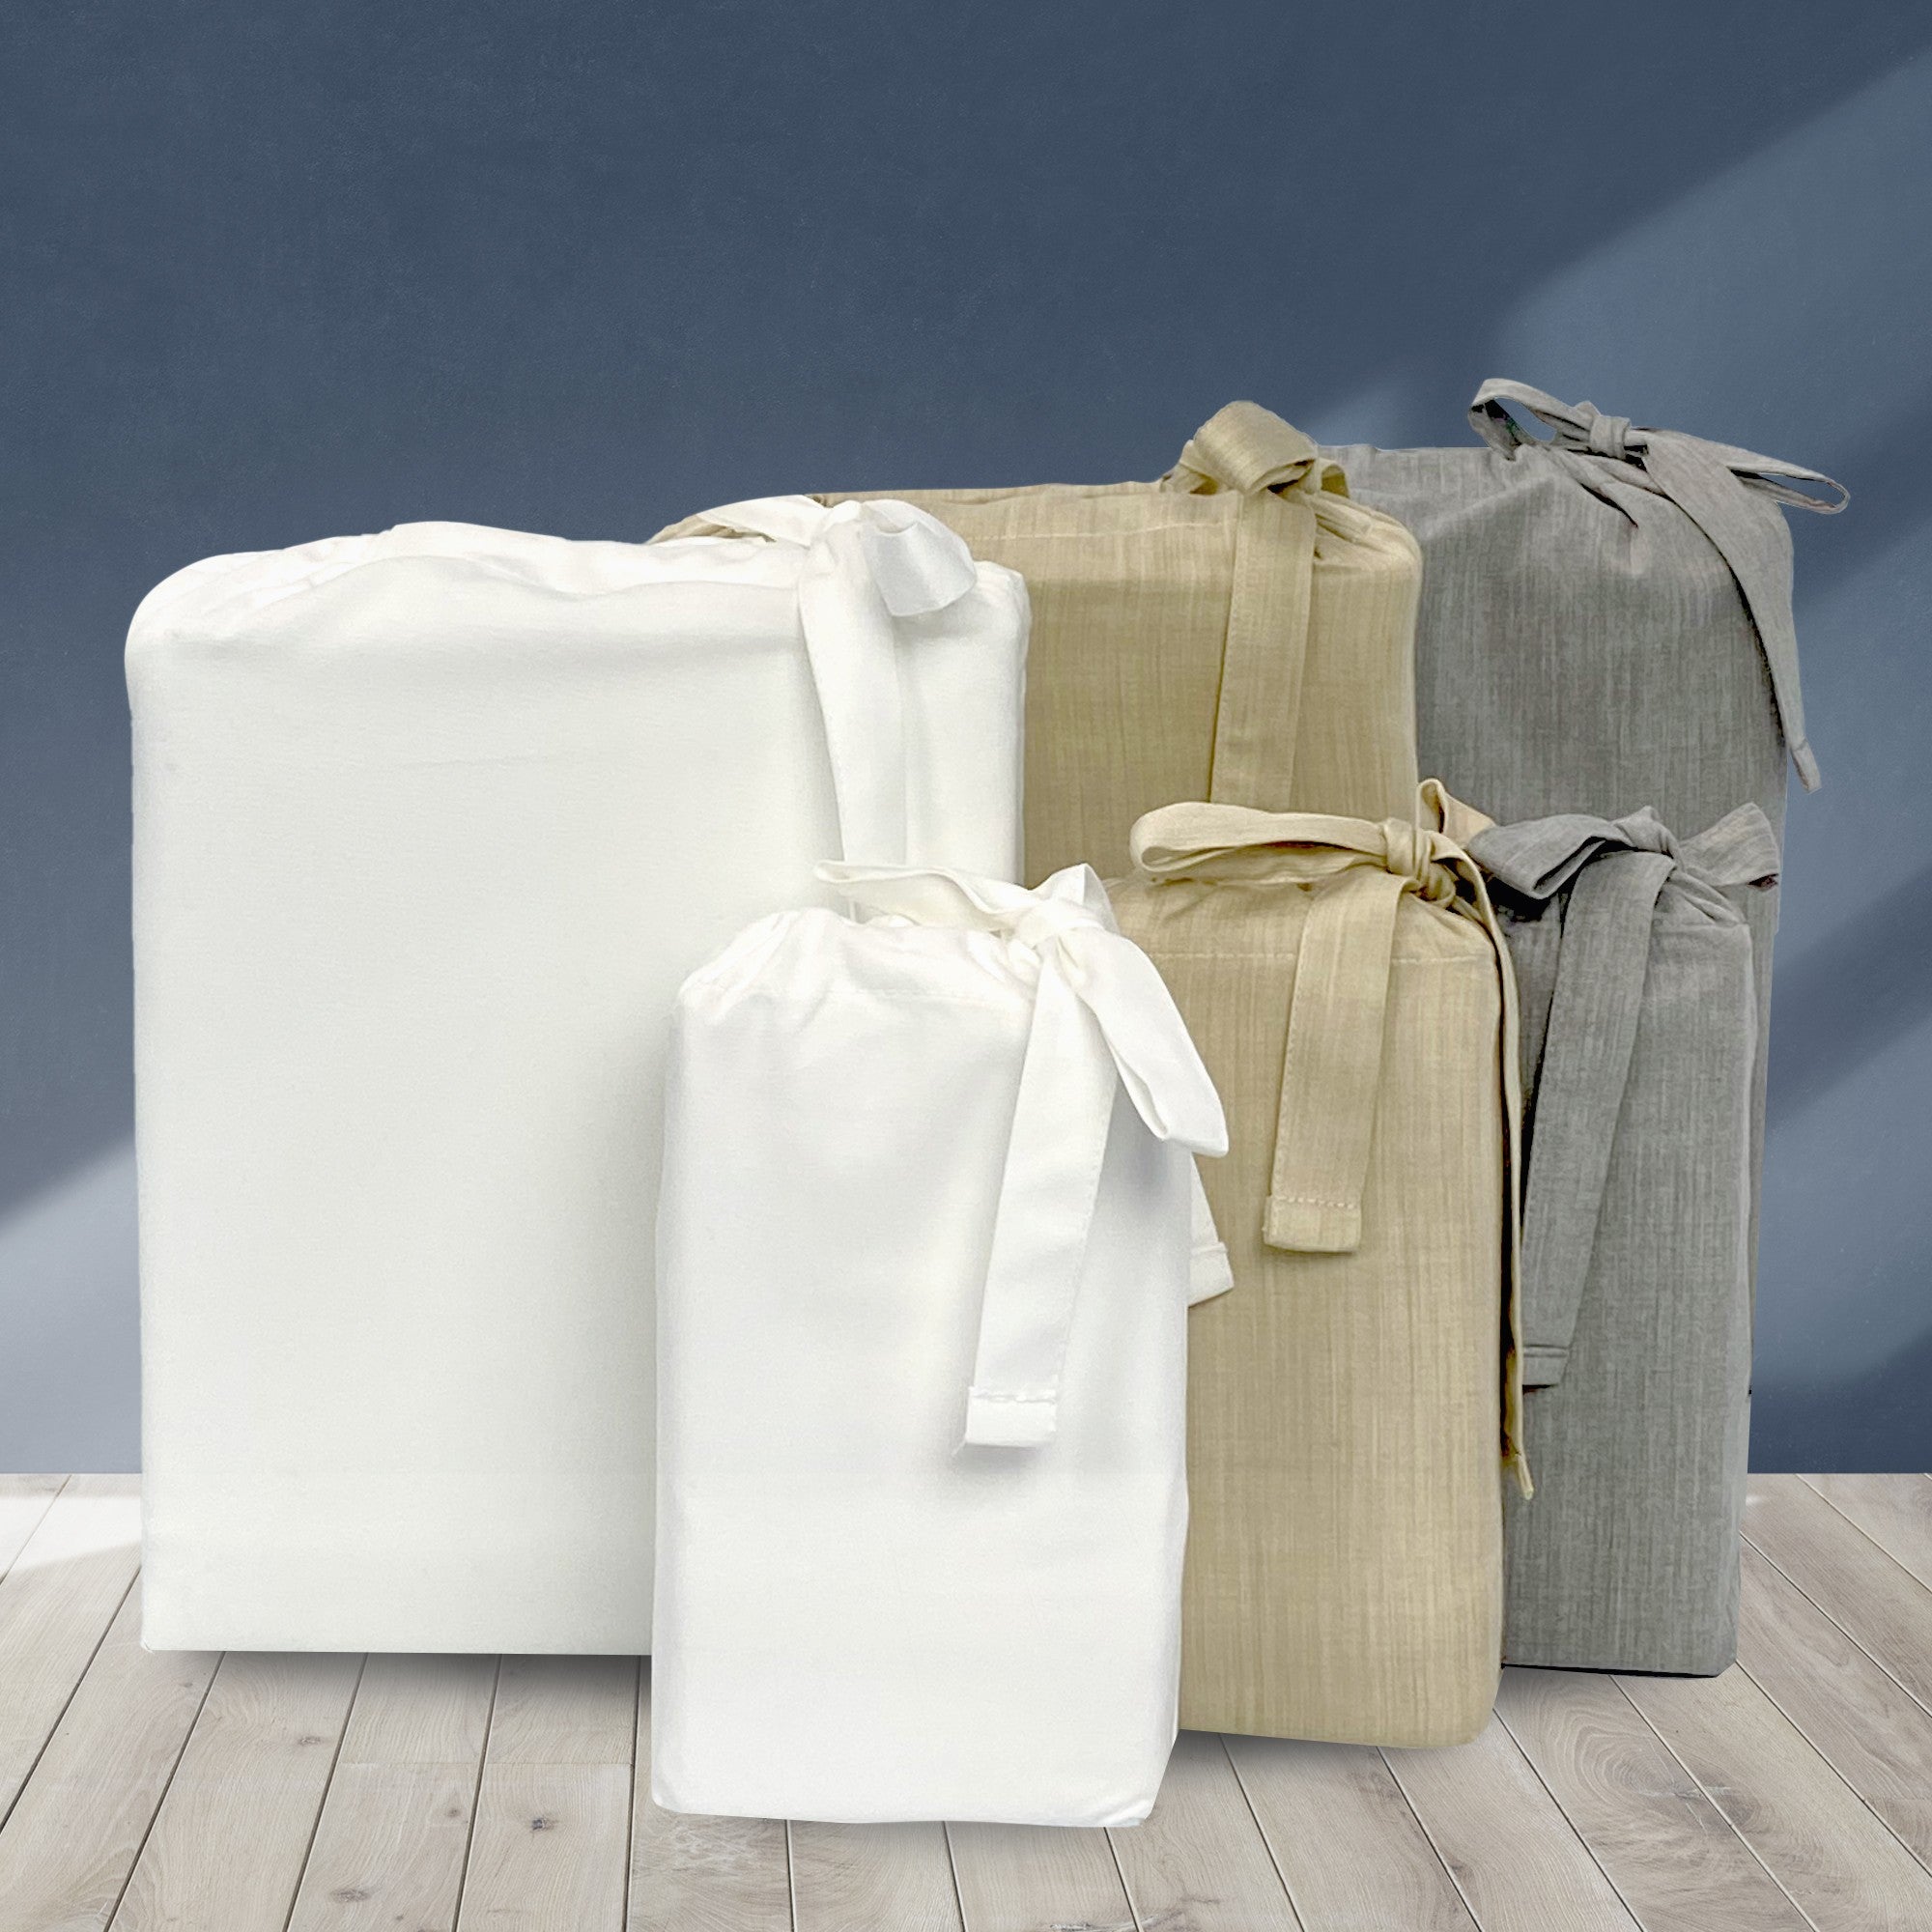 MELANGE Bamboo Pillowcase Sets - Resistant to Bacteria and Odors, Ultra Smooth and Hypoallergenic Pillow Cover Sets - Snow